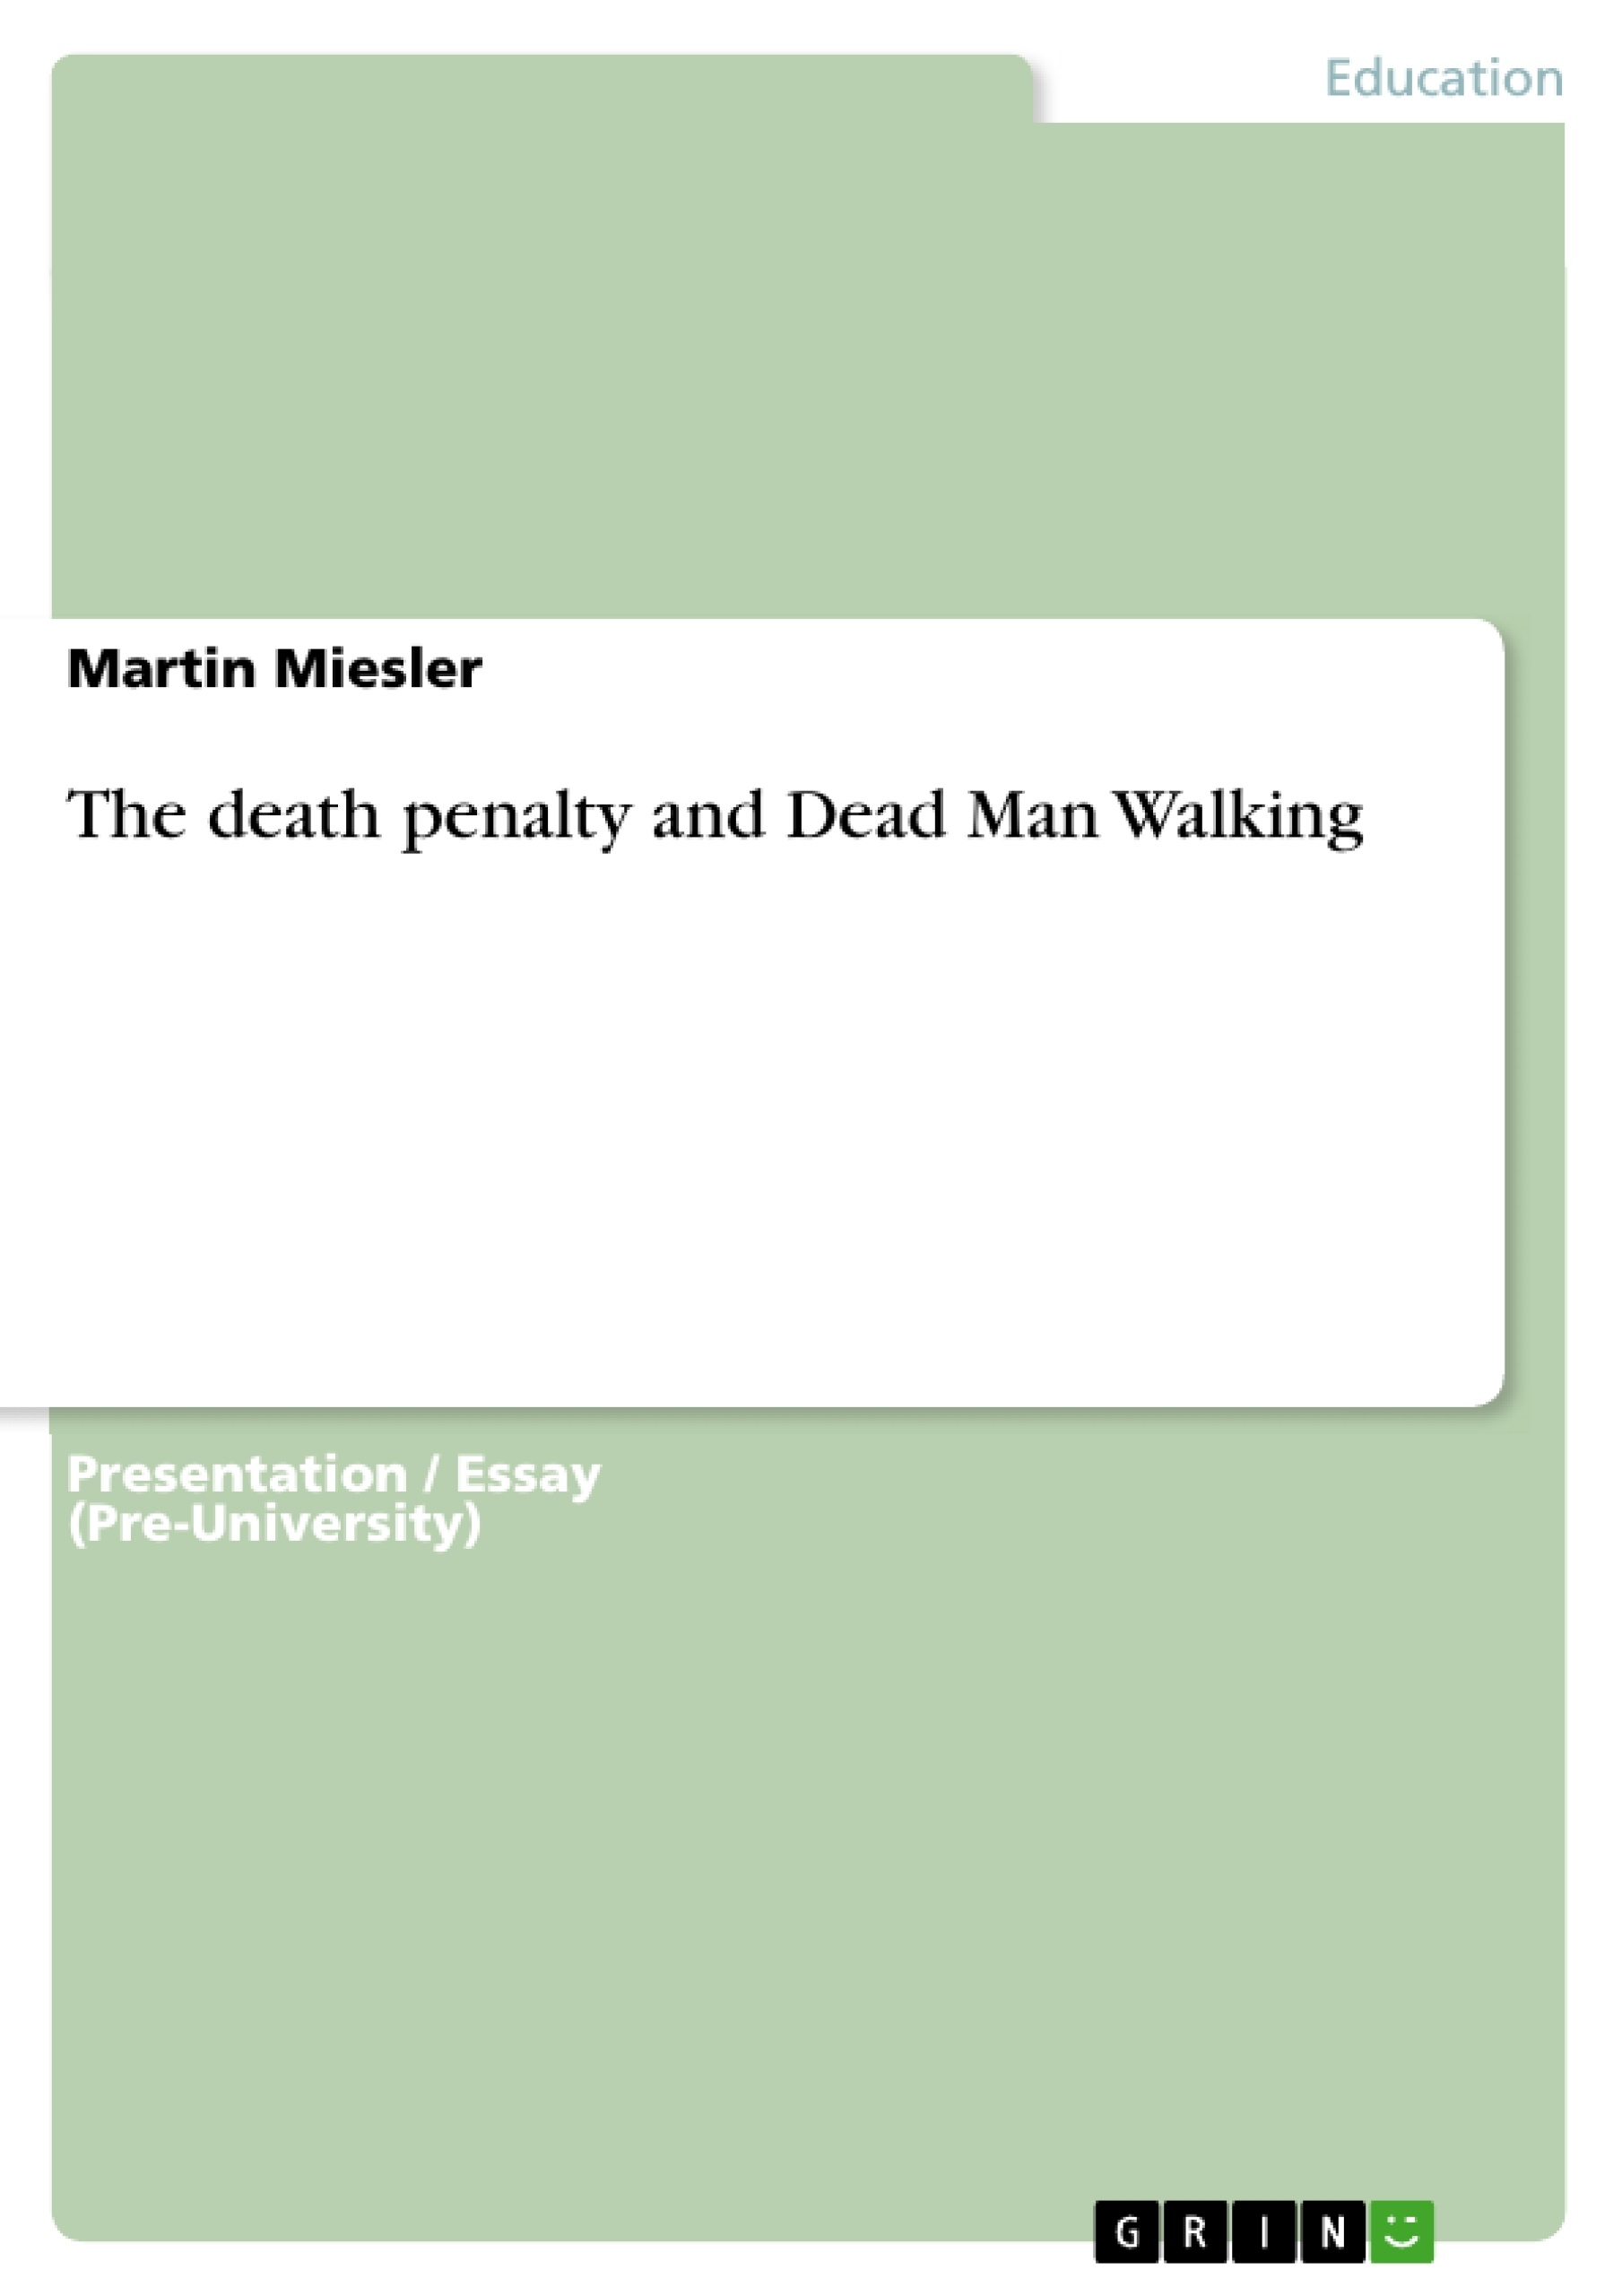 Title: The death penalty and Dead Man Walking